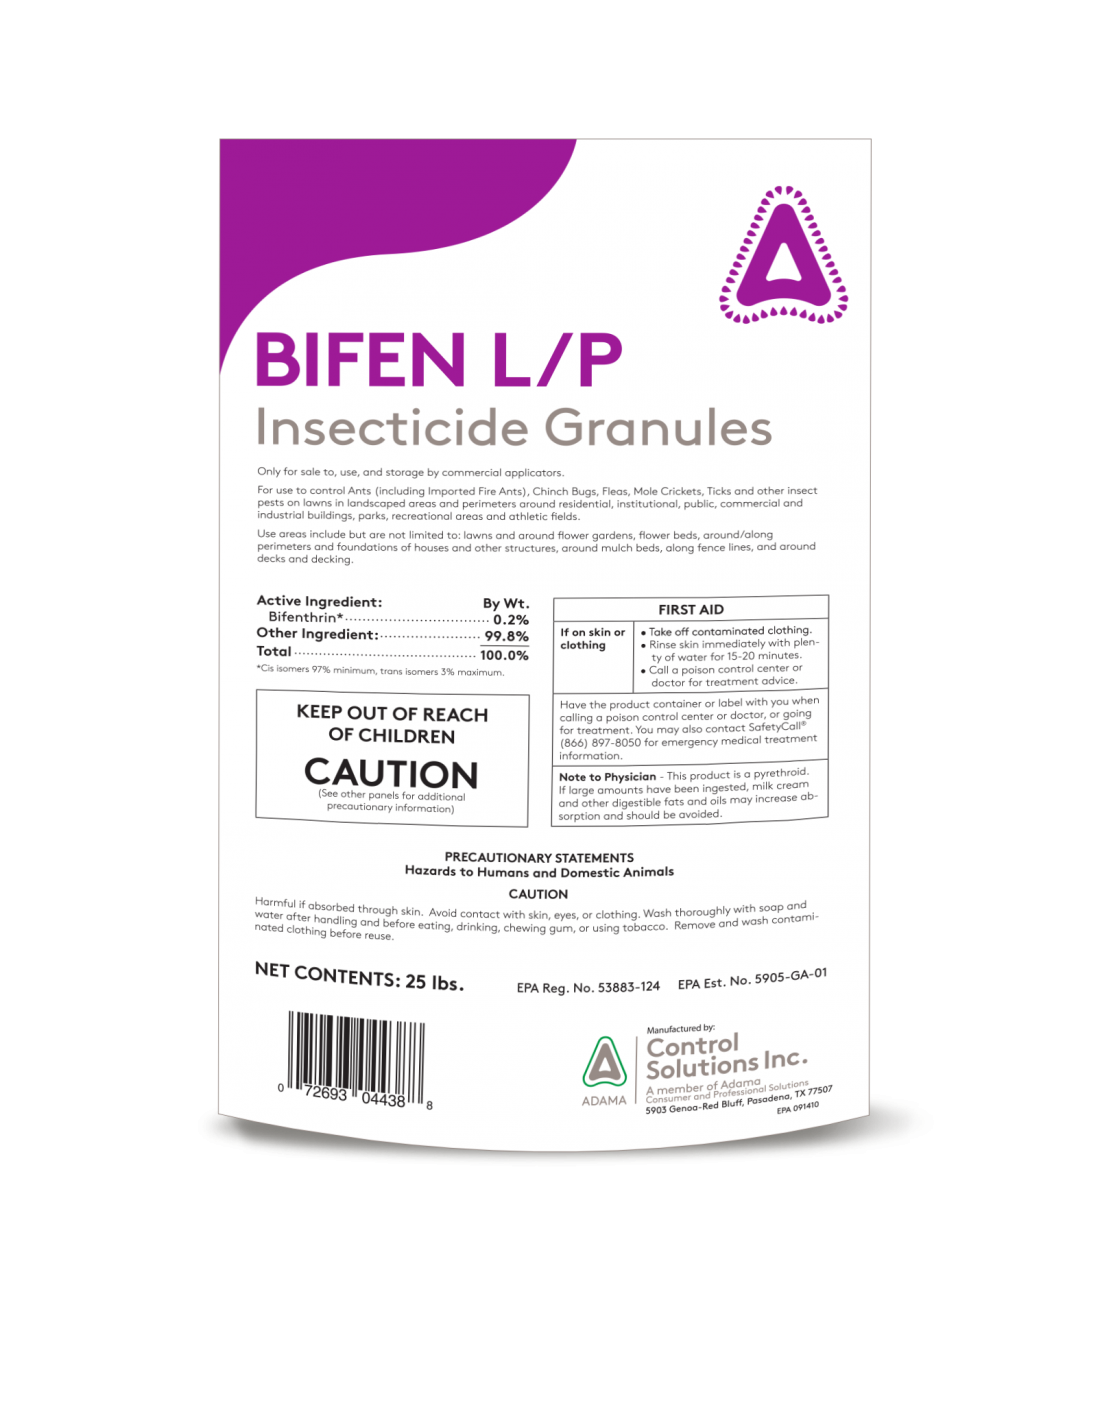 Bifen LP Insecticide Granules Questions & Answers